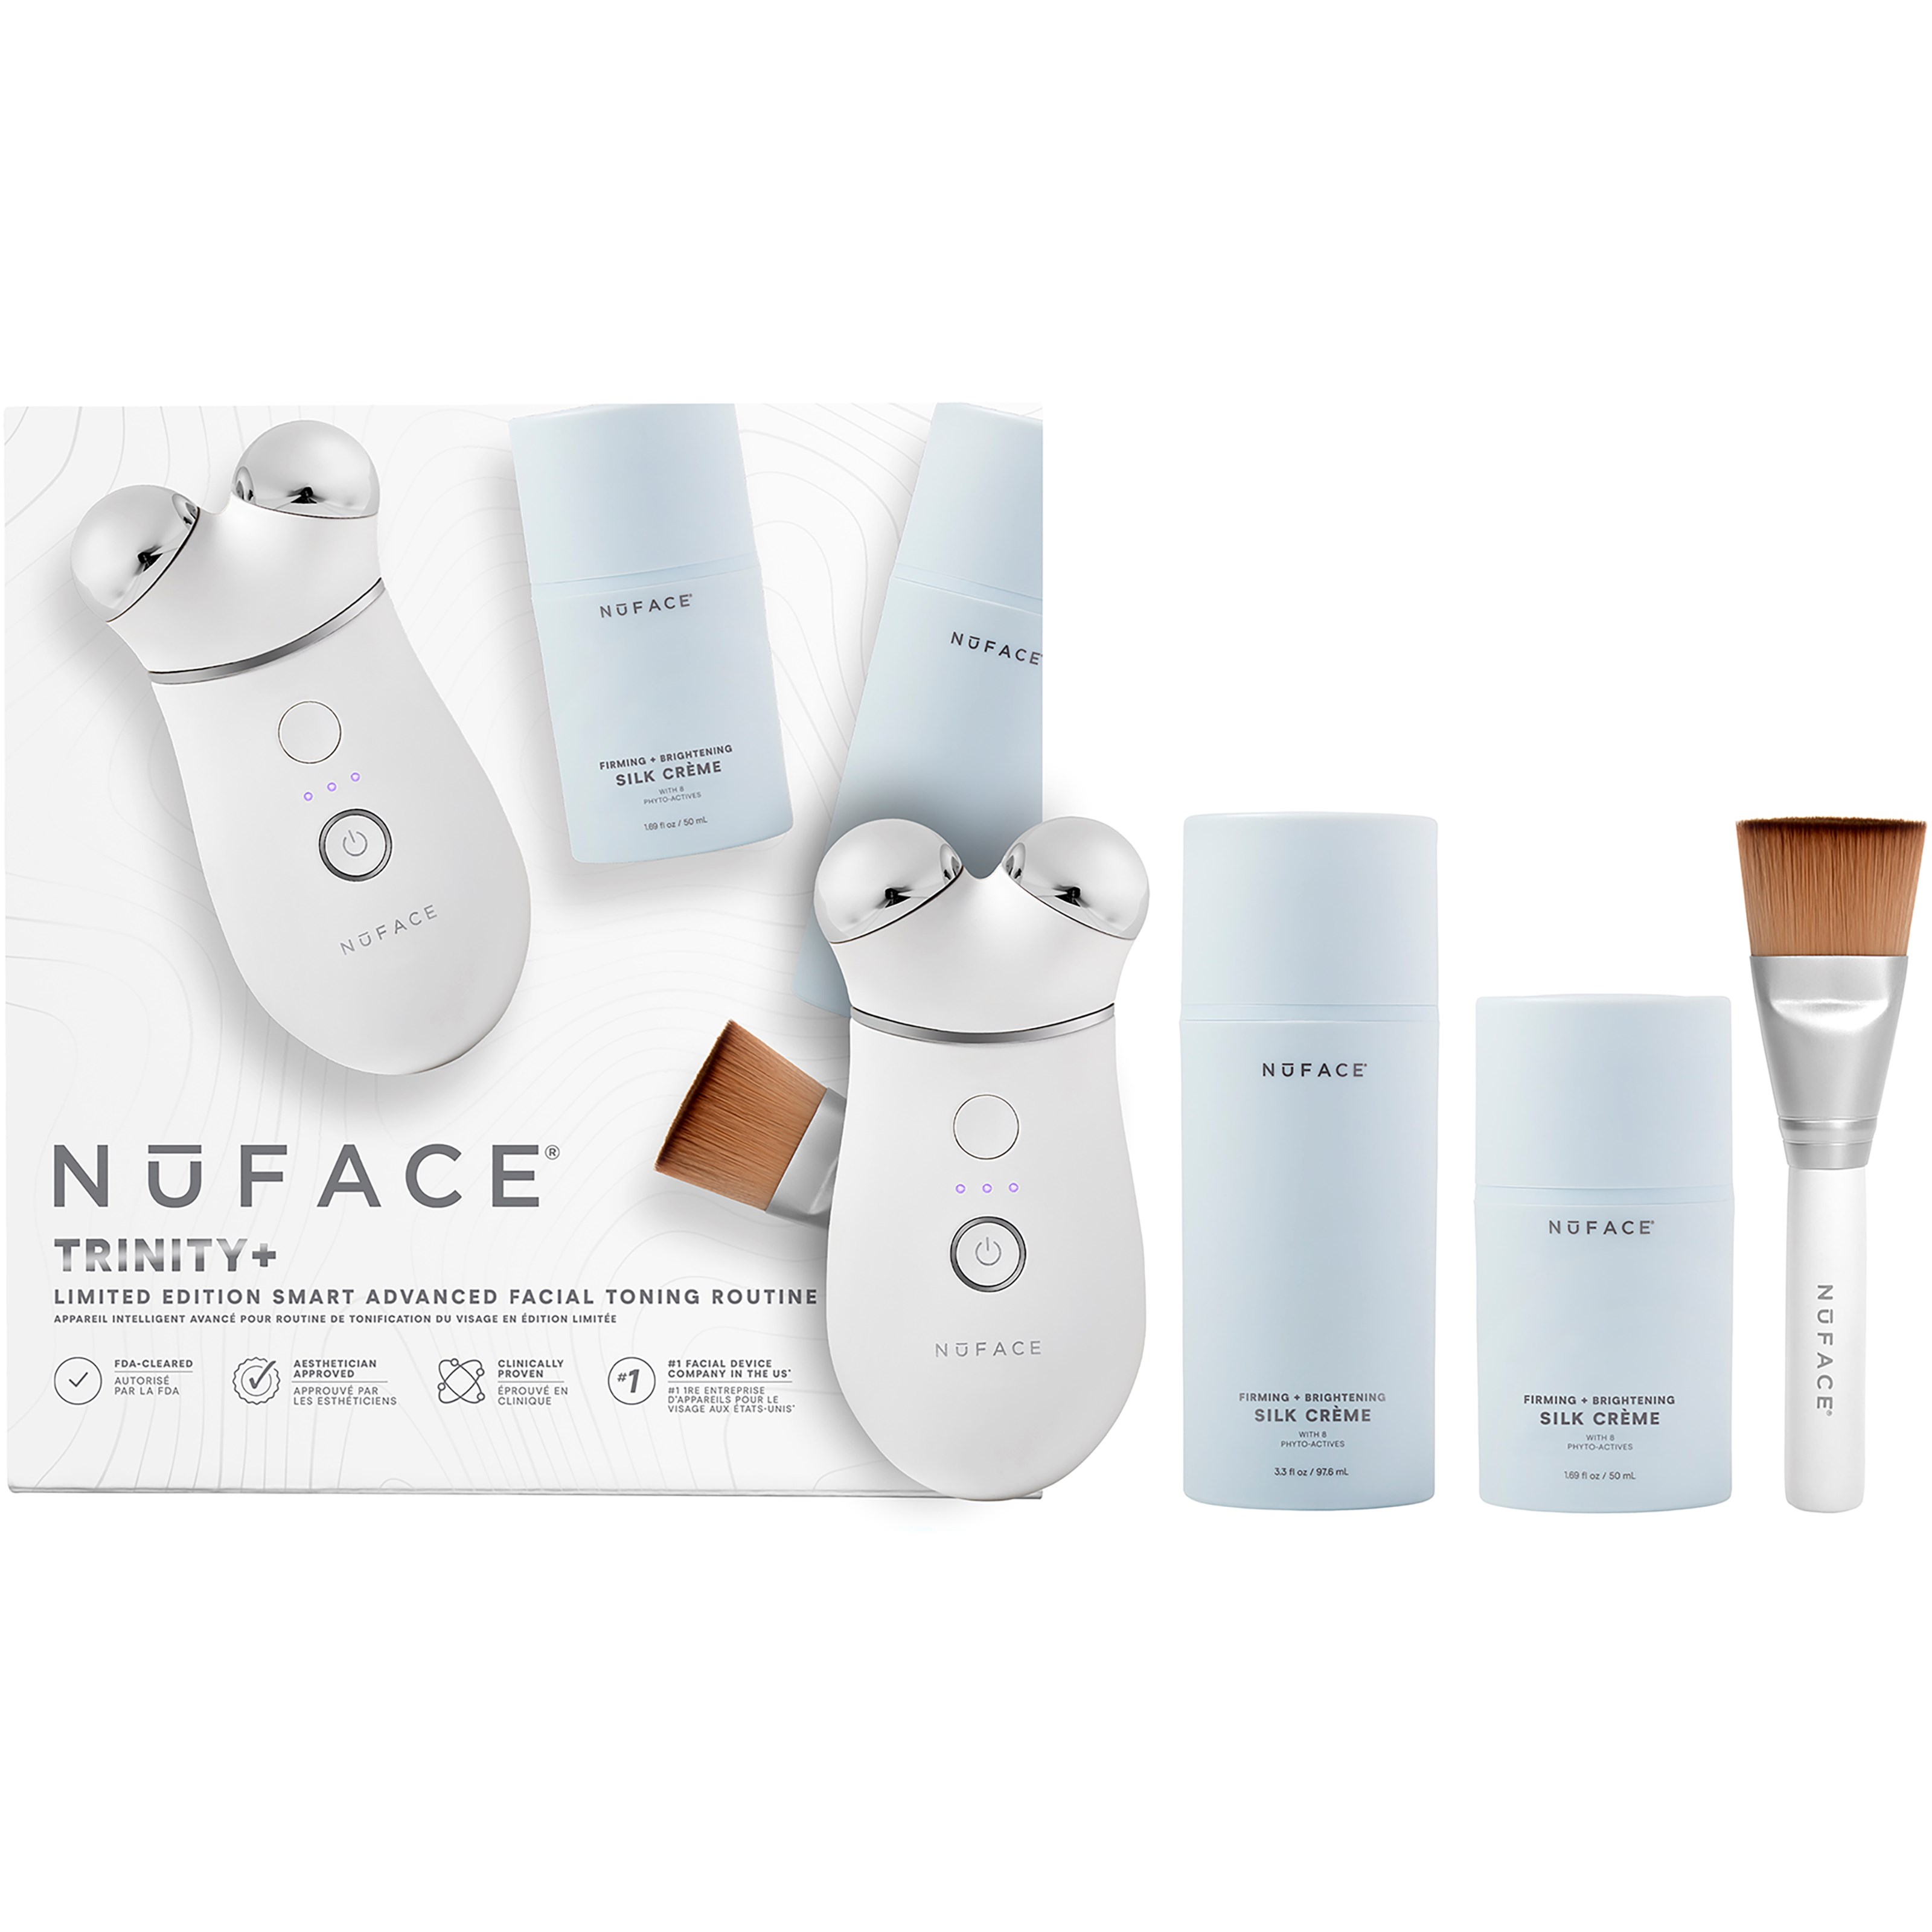 NuFACE Trinity+ Facial Toning Device Limited Edition Kit